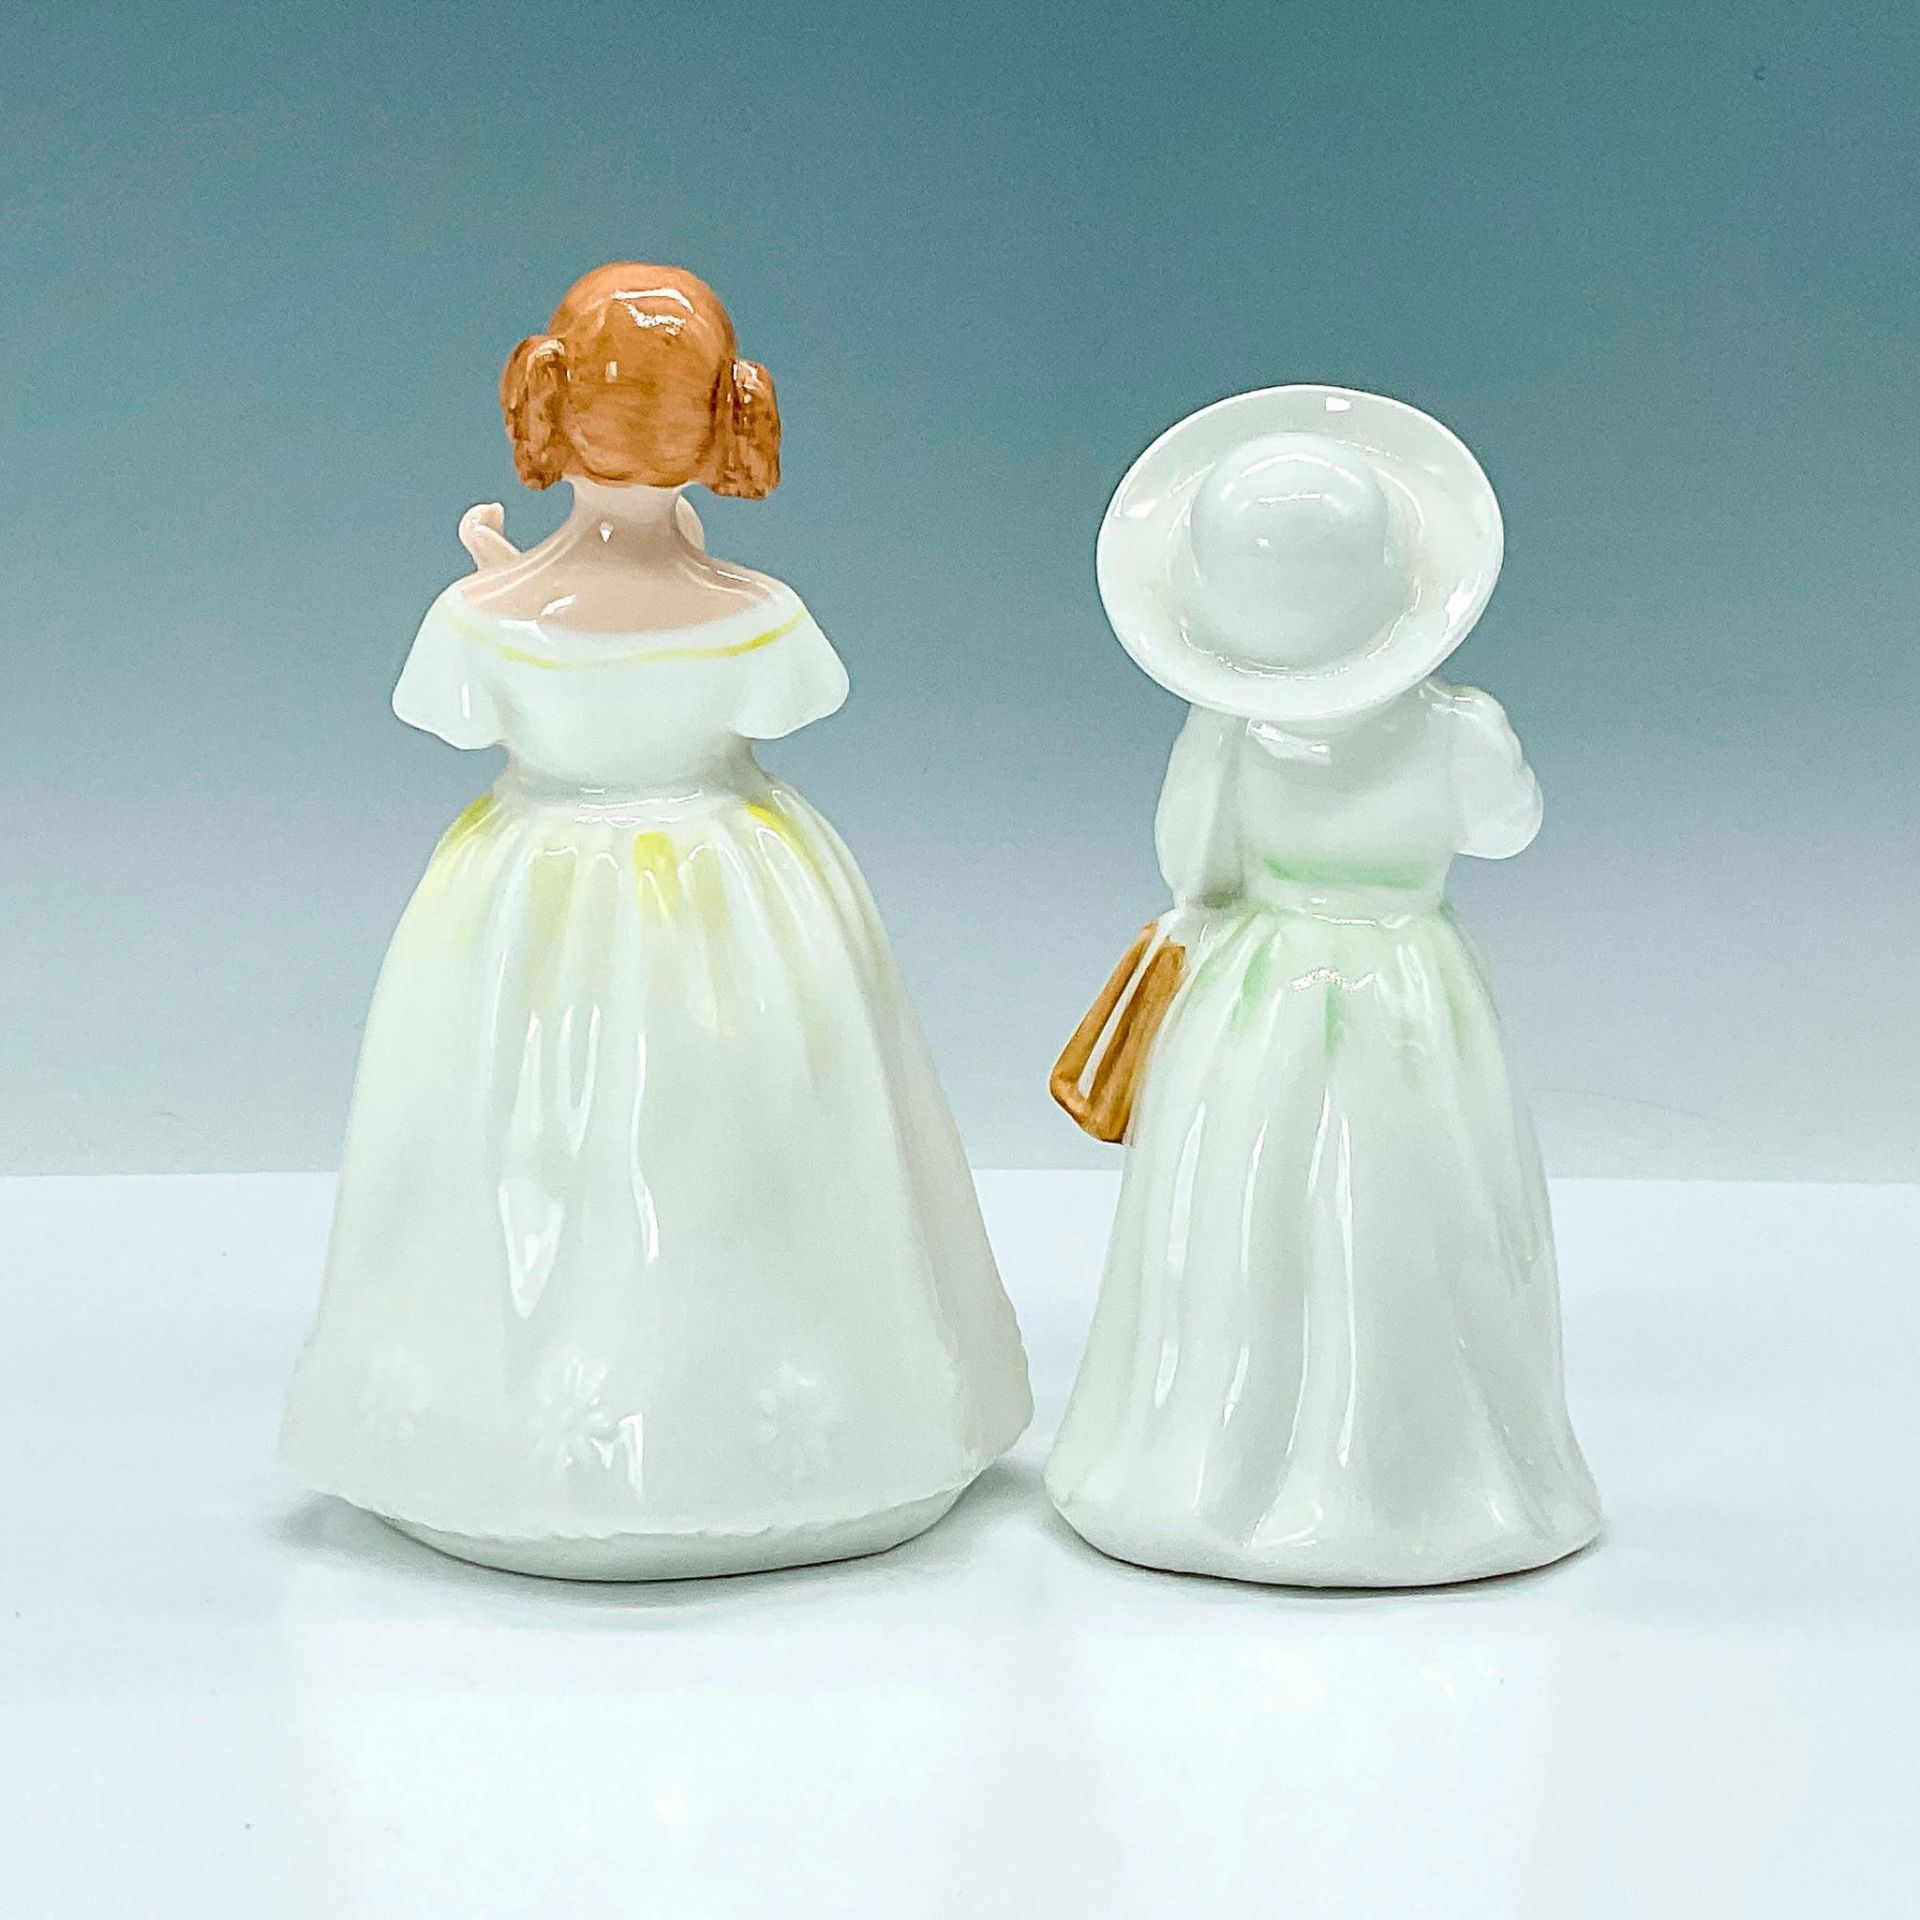 2pc Royal Doulton Figurines, Catherine & Almost Grown - Image 2 of 3